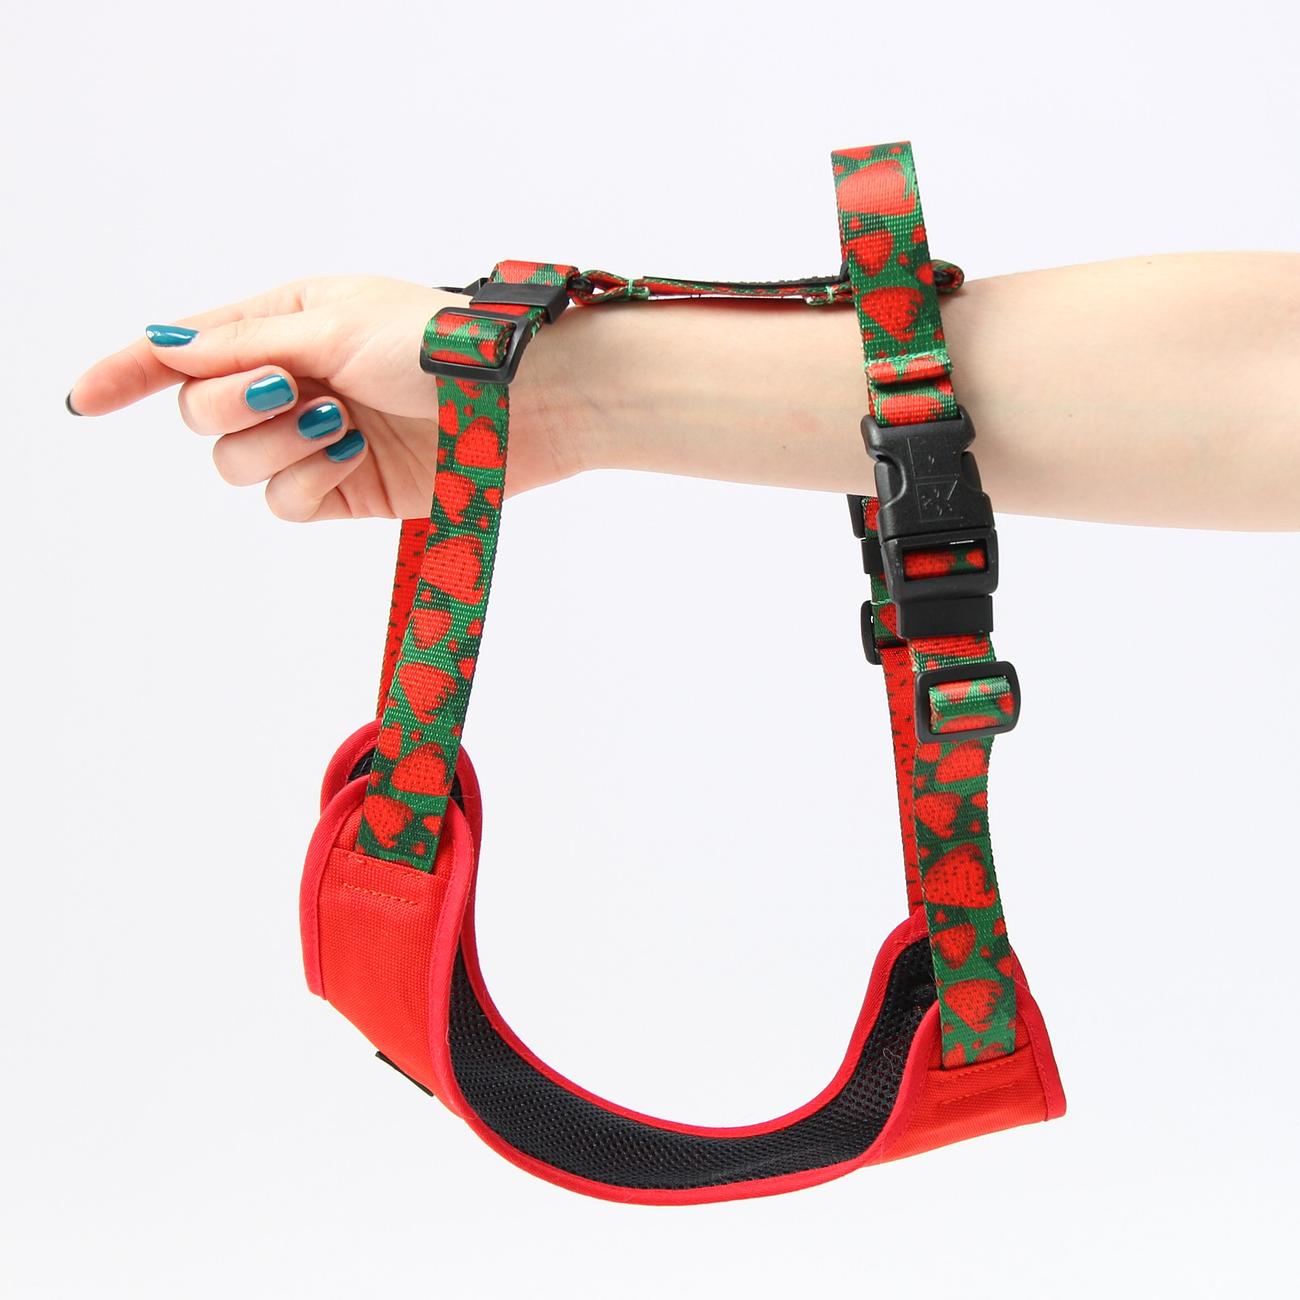 "Strawberry Fields Forever" pressure-free harness